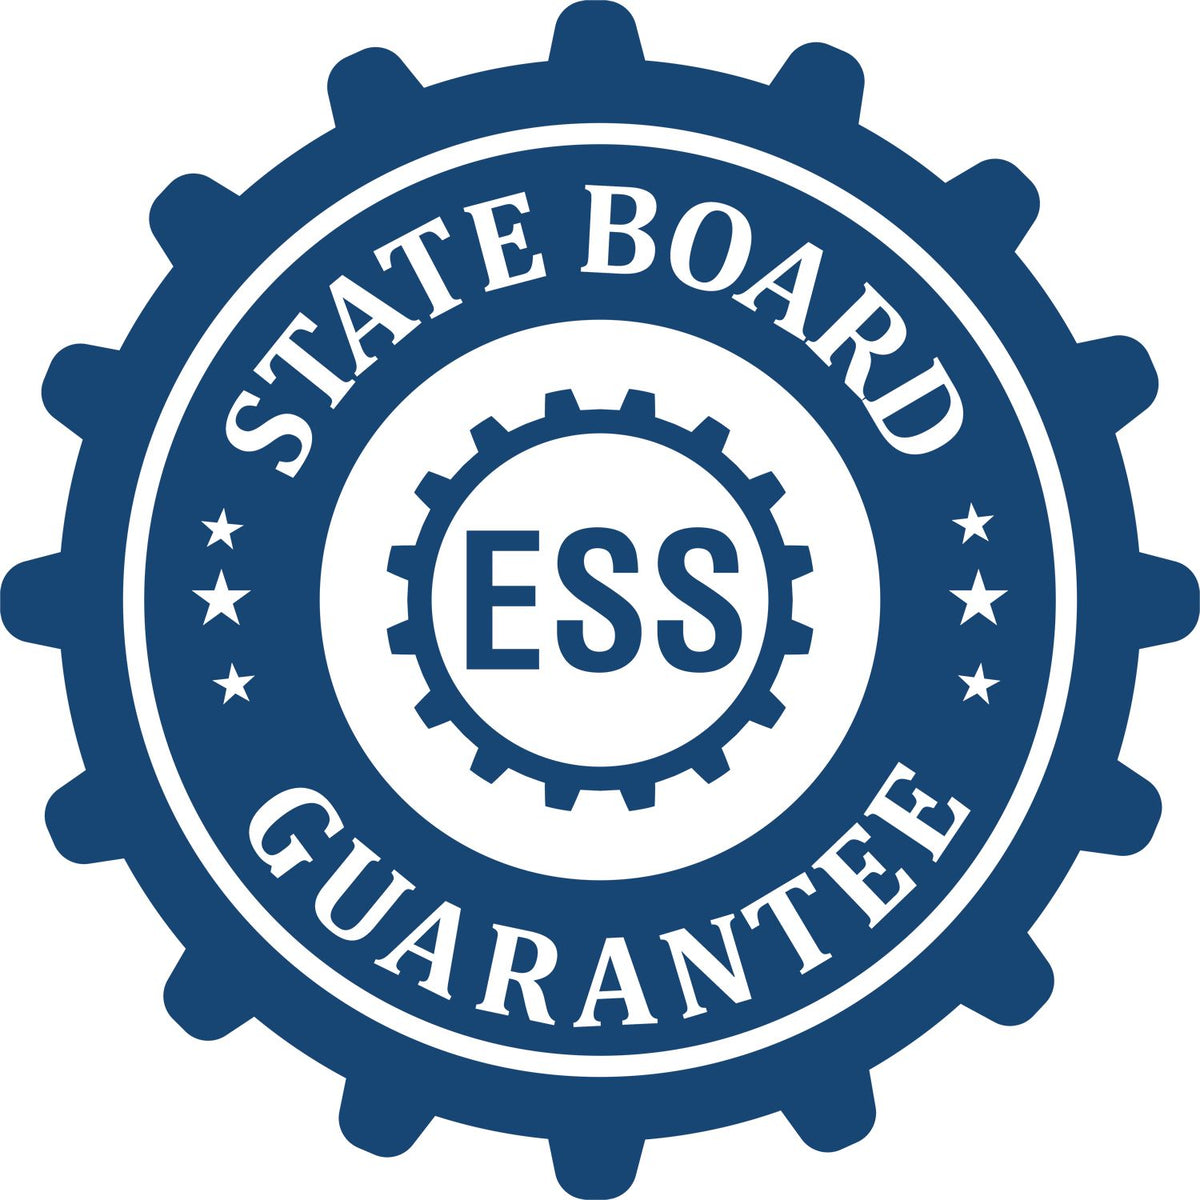 An emblem in a gear shape illustrating a state board guarantee for the Digital Iowa PE Stamp and Electronic Seal for Iowa Engineer product.